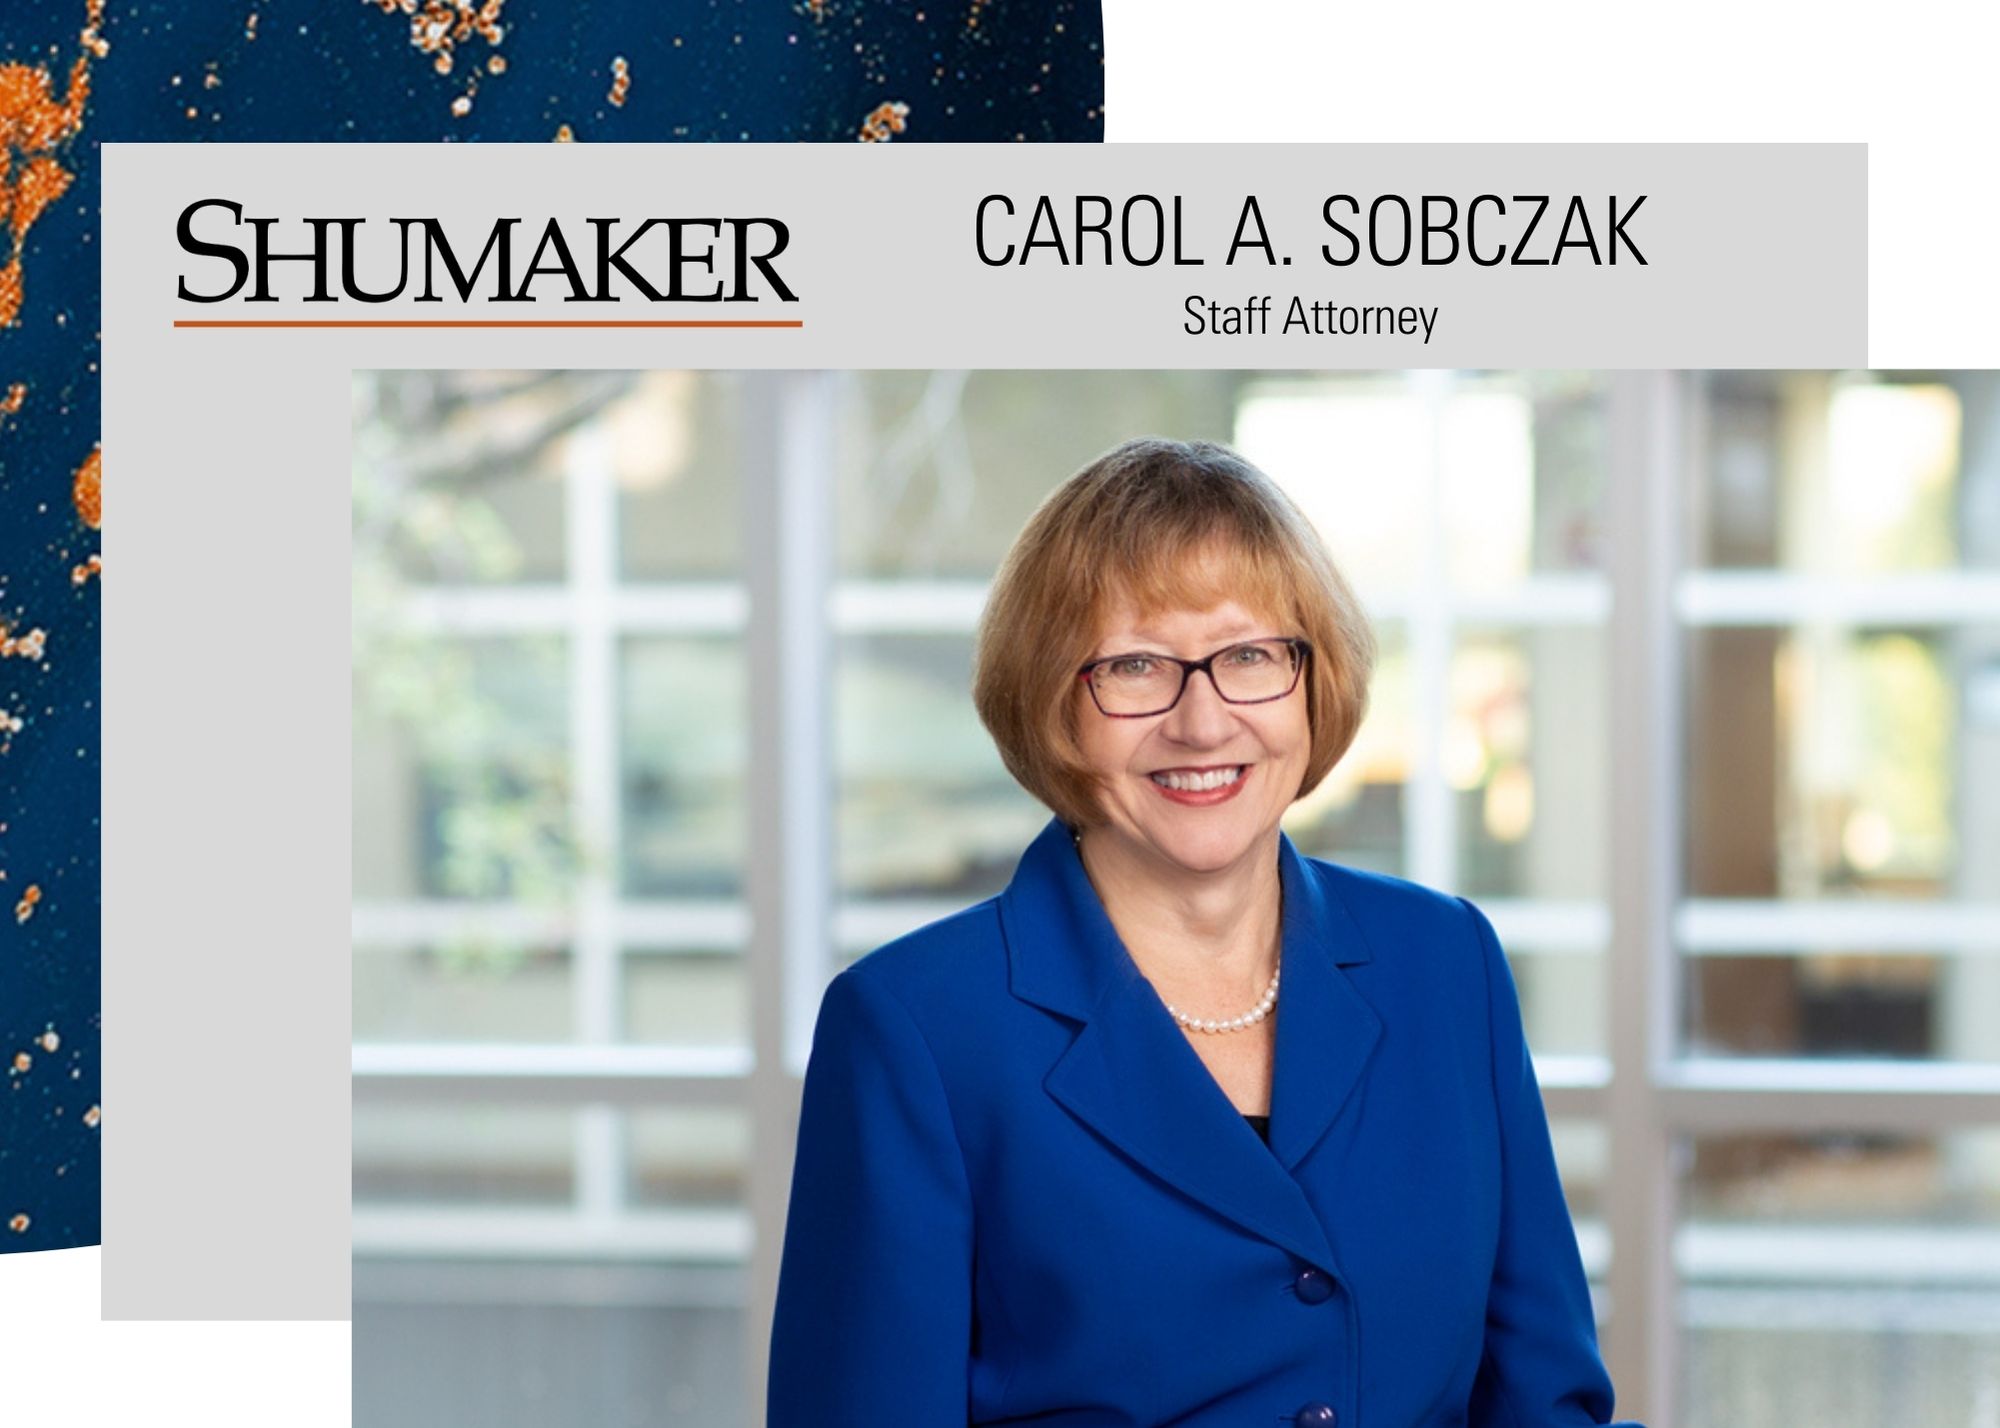 Carol A. Sobczak to Volunteer her Time to Educate Community on Special Needs Trusts